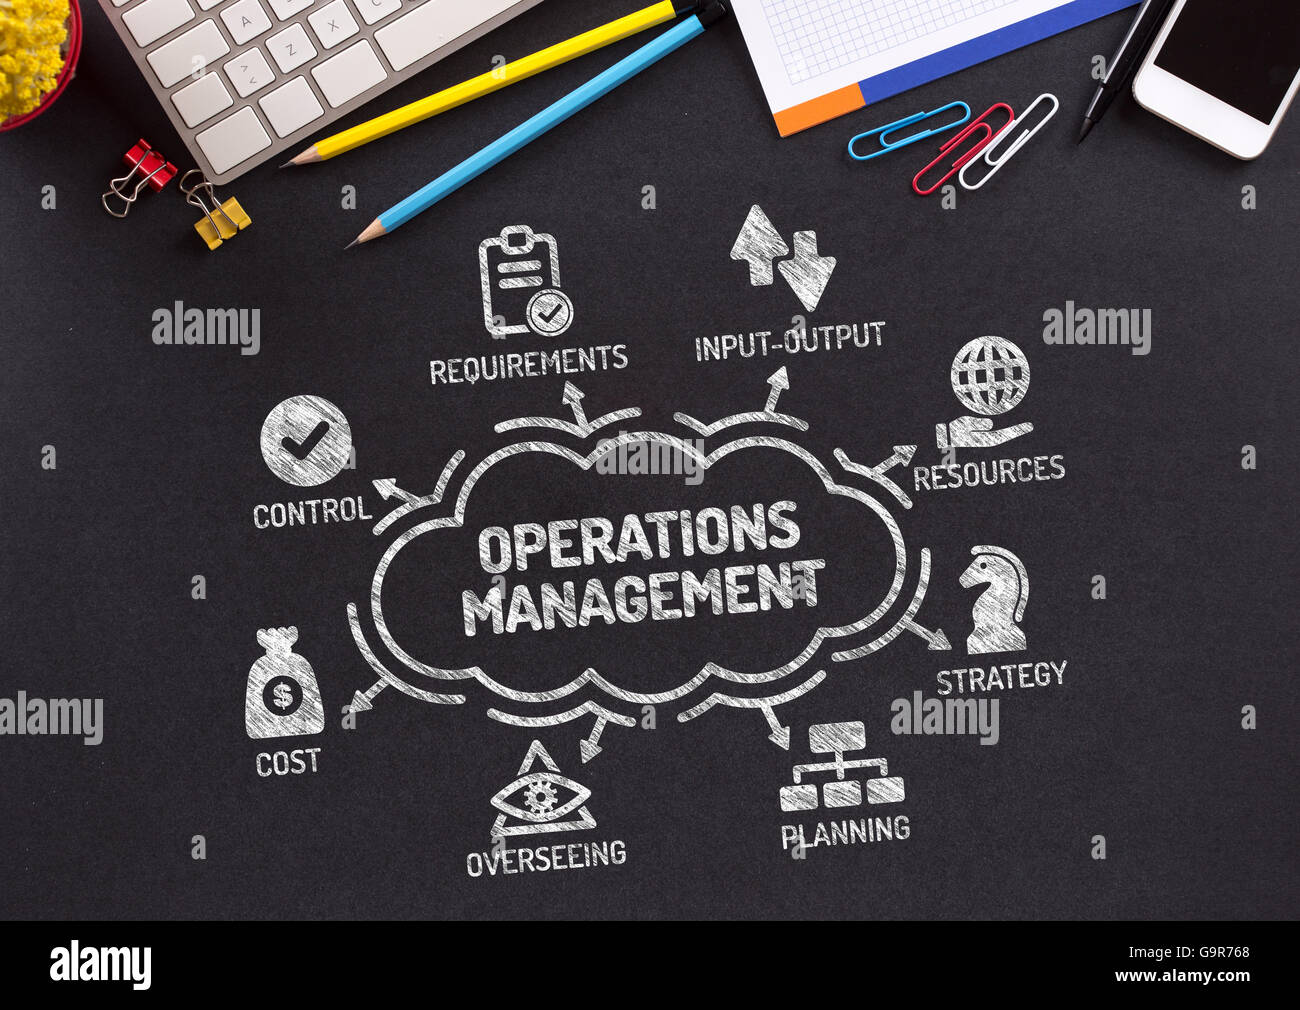 Operations Management Chart with keywords and icons on blackboard Stock Photo